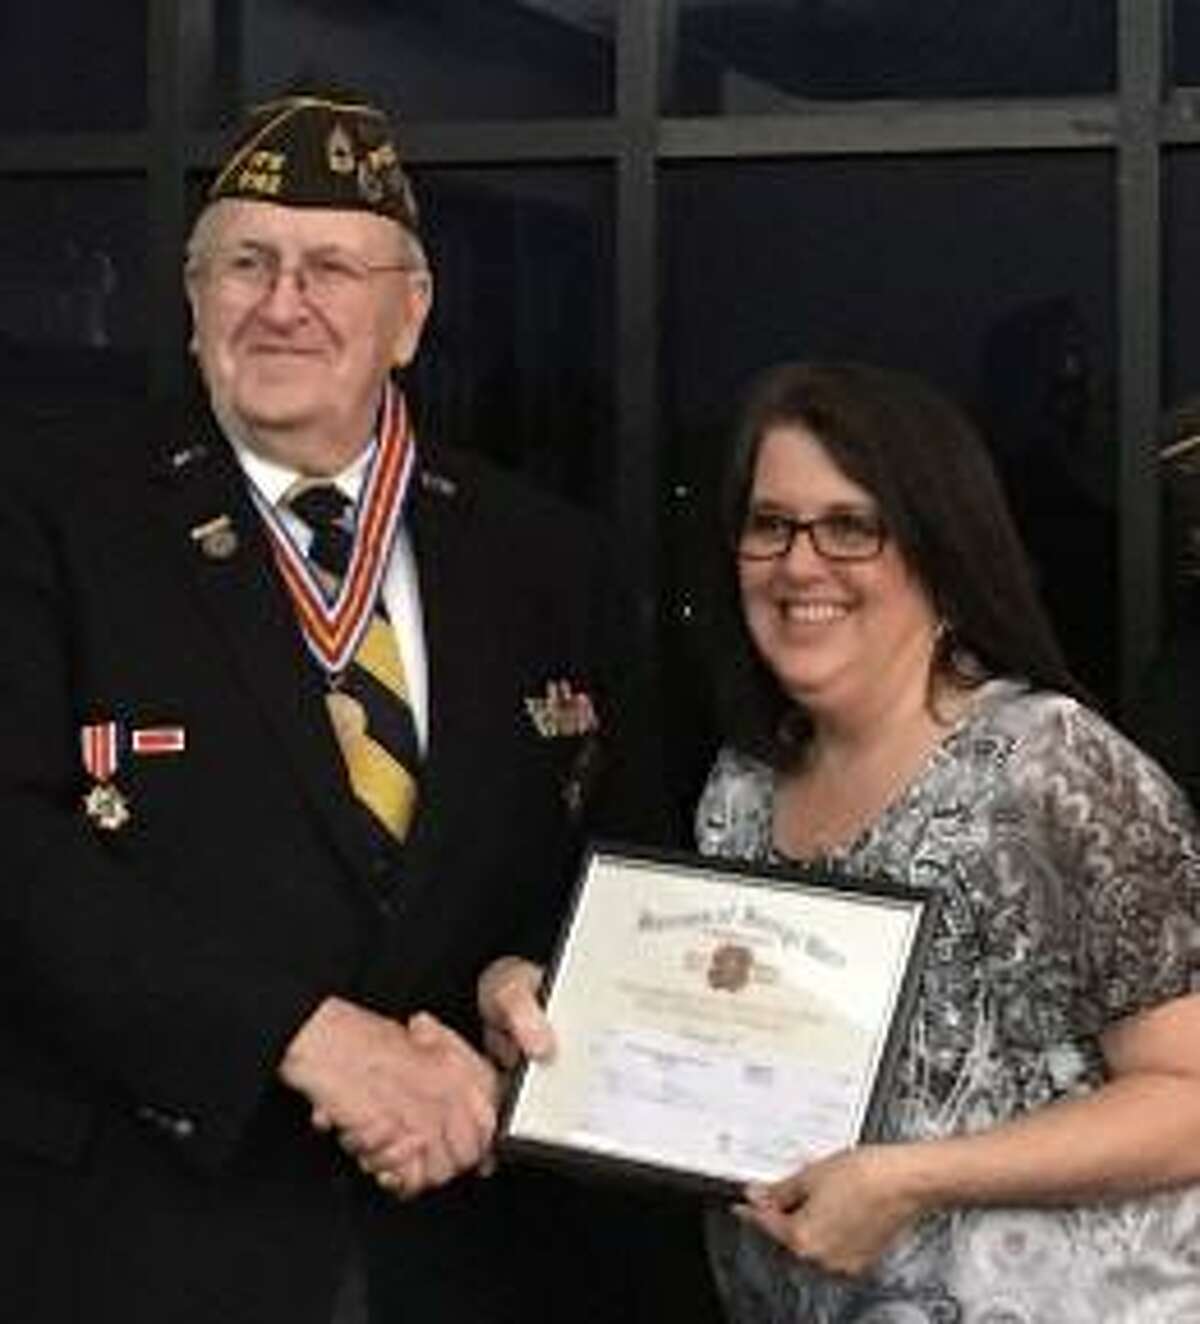 Katy Veterans of Foreign Wars Post 9182 Commander Don Byrne congratulates Teri Gardner, a third-grade teacher at Exley Elementary, who received the Citizenship Education Teacher of the Year award on March 30.